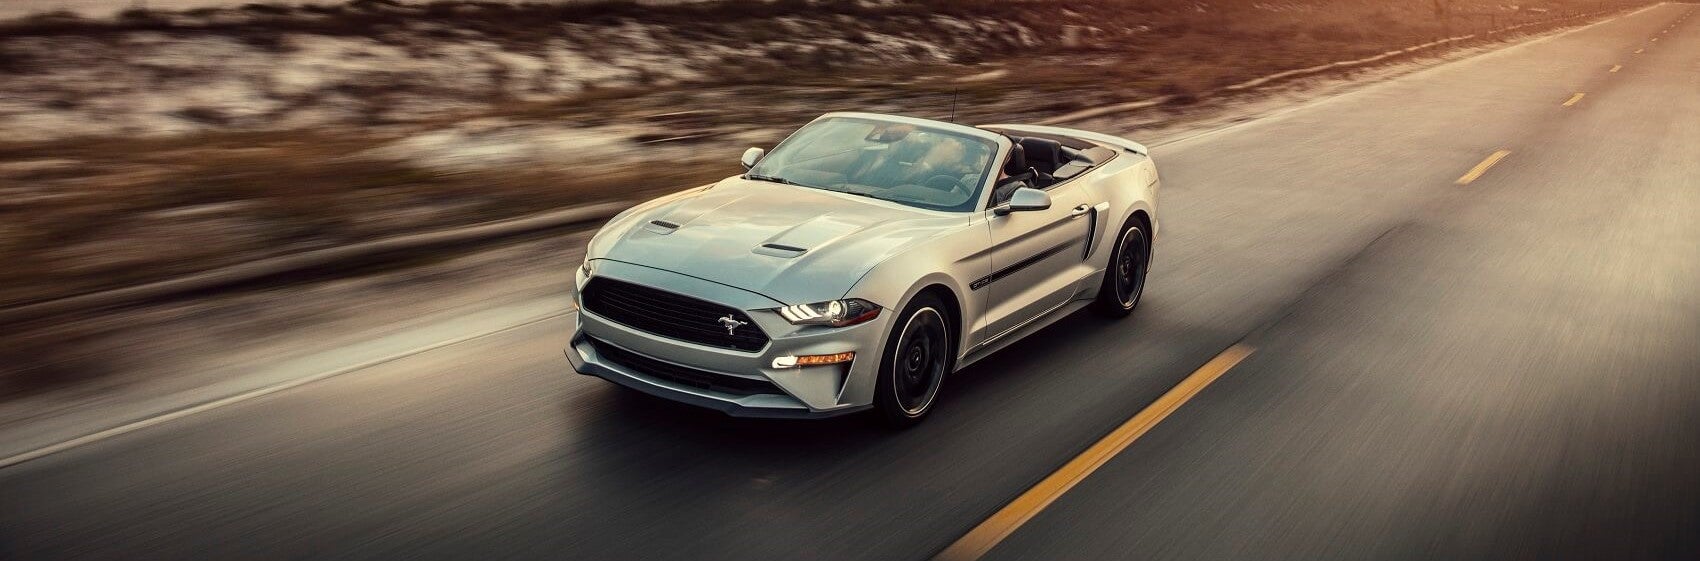 Used Ford Mustang for Sale Newport News VA